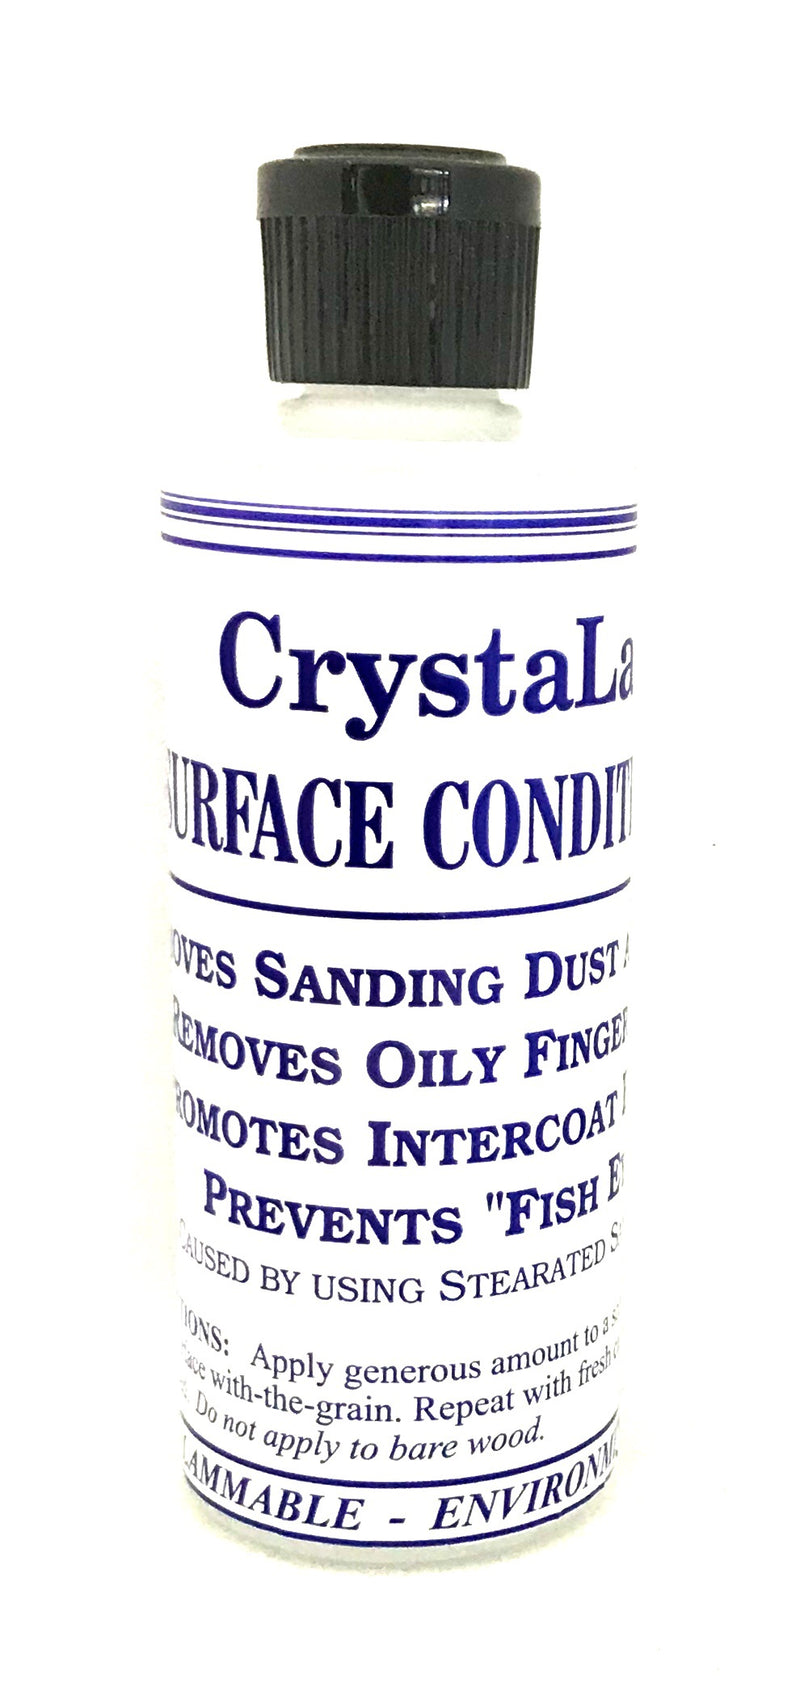 CrystaLac Surface Conditioner